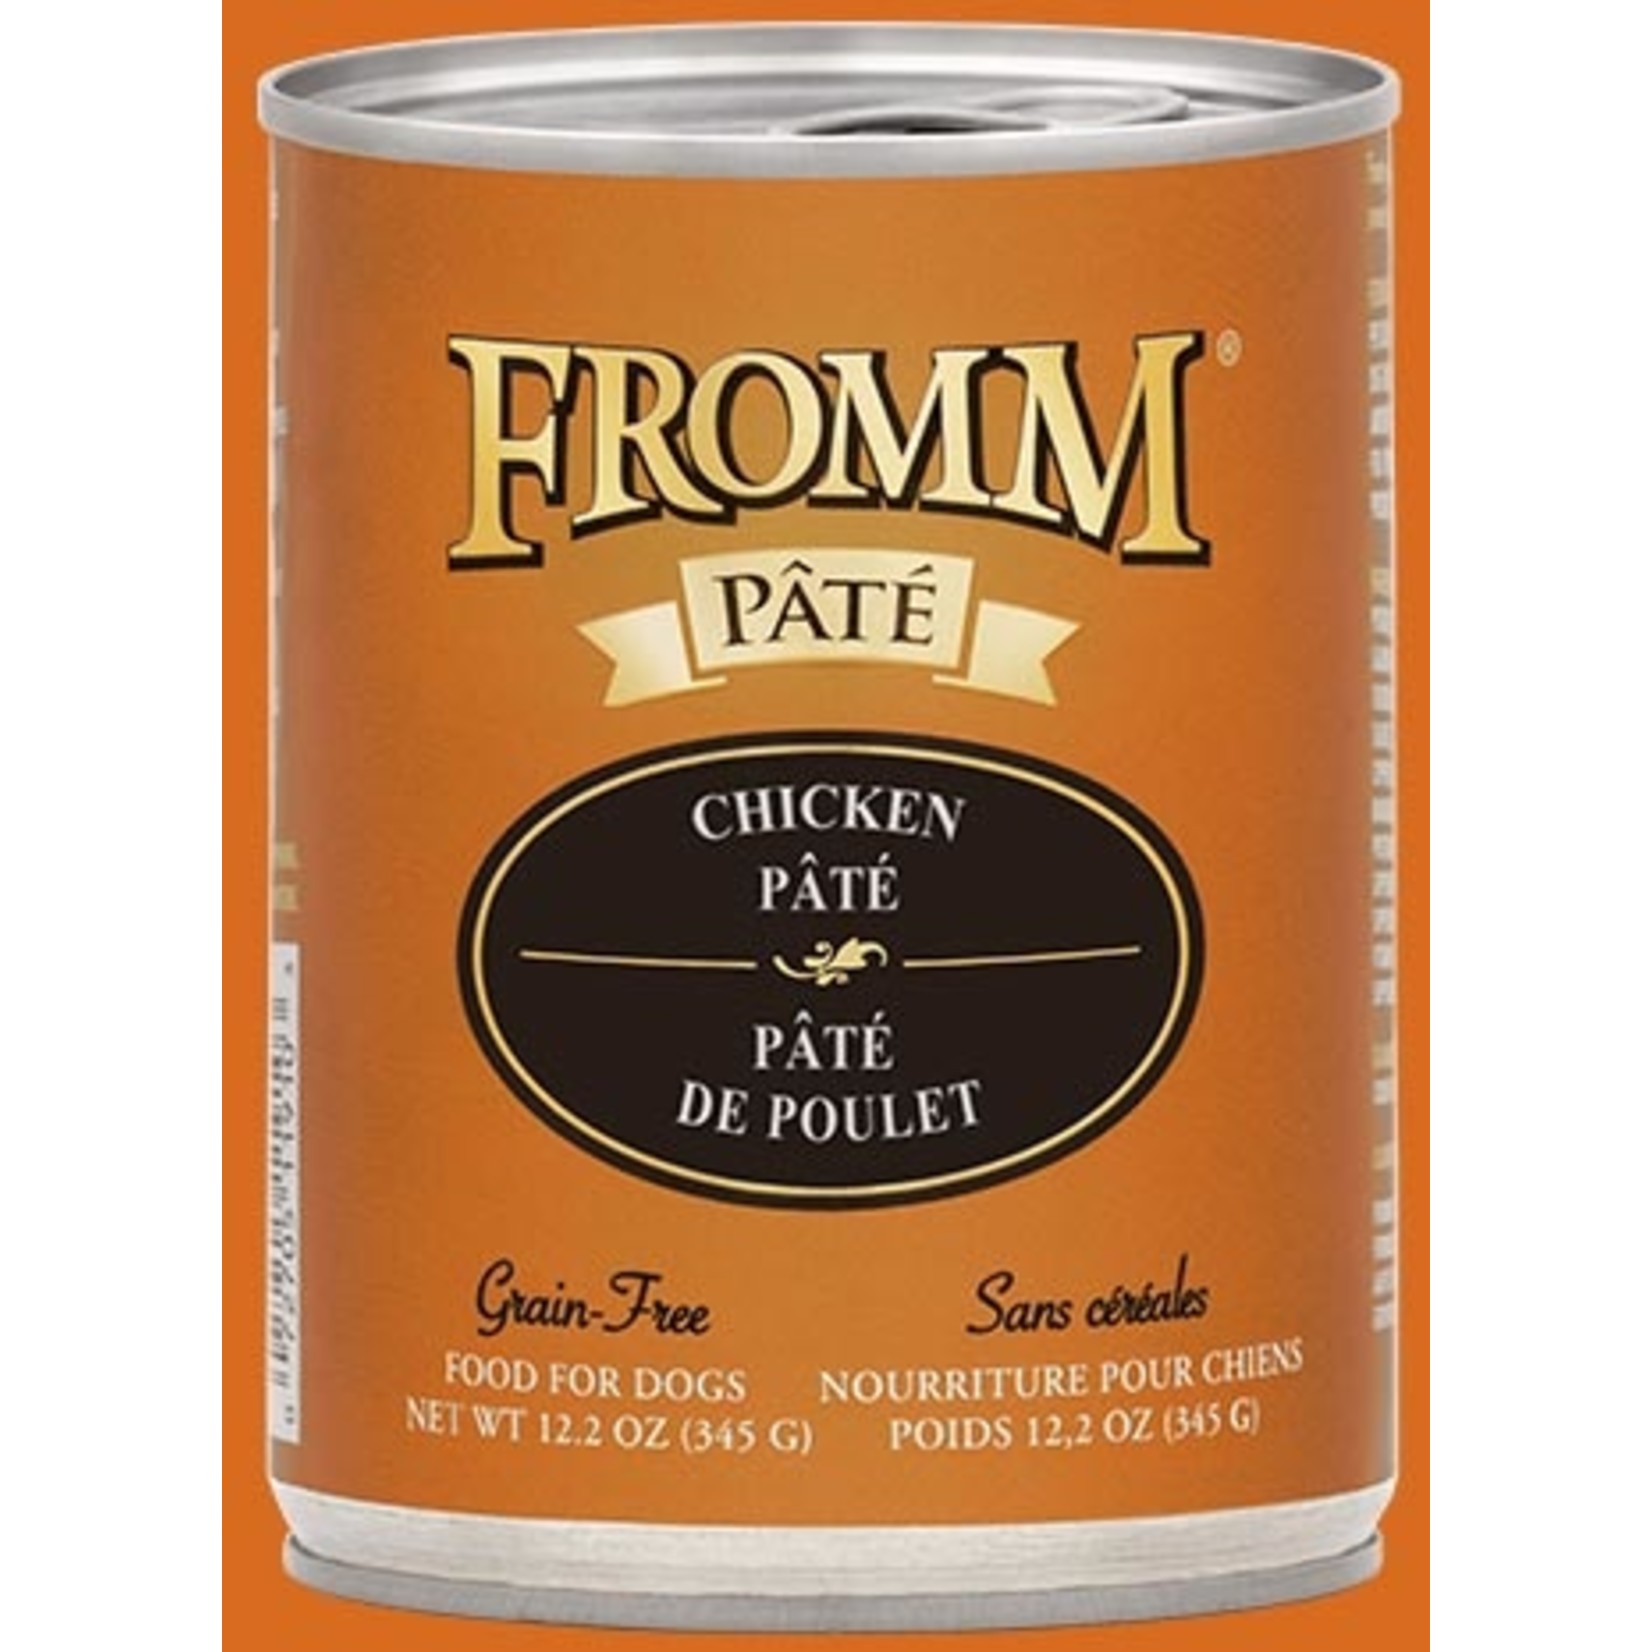 Fromm Fromm Wet Dog Food Chicken Pate 12.2oz Can Grain Free